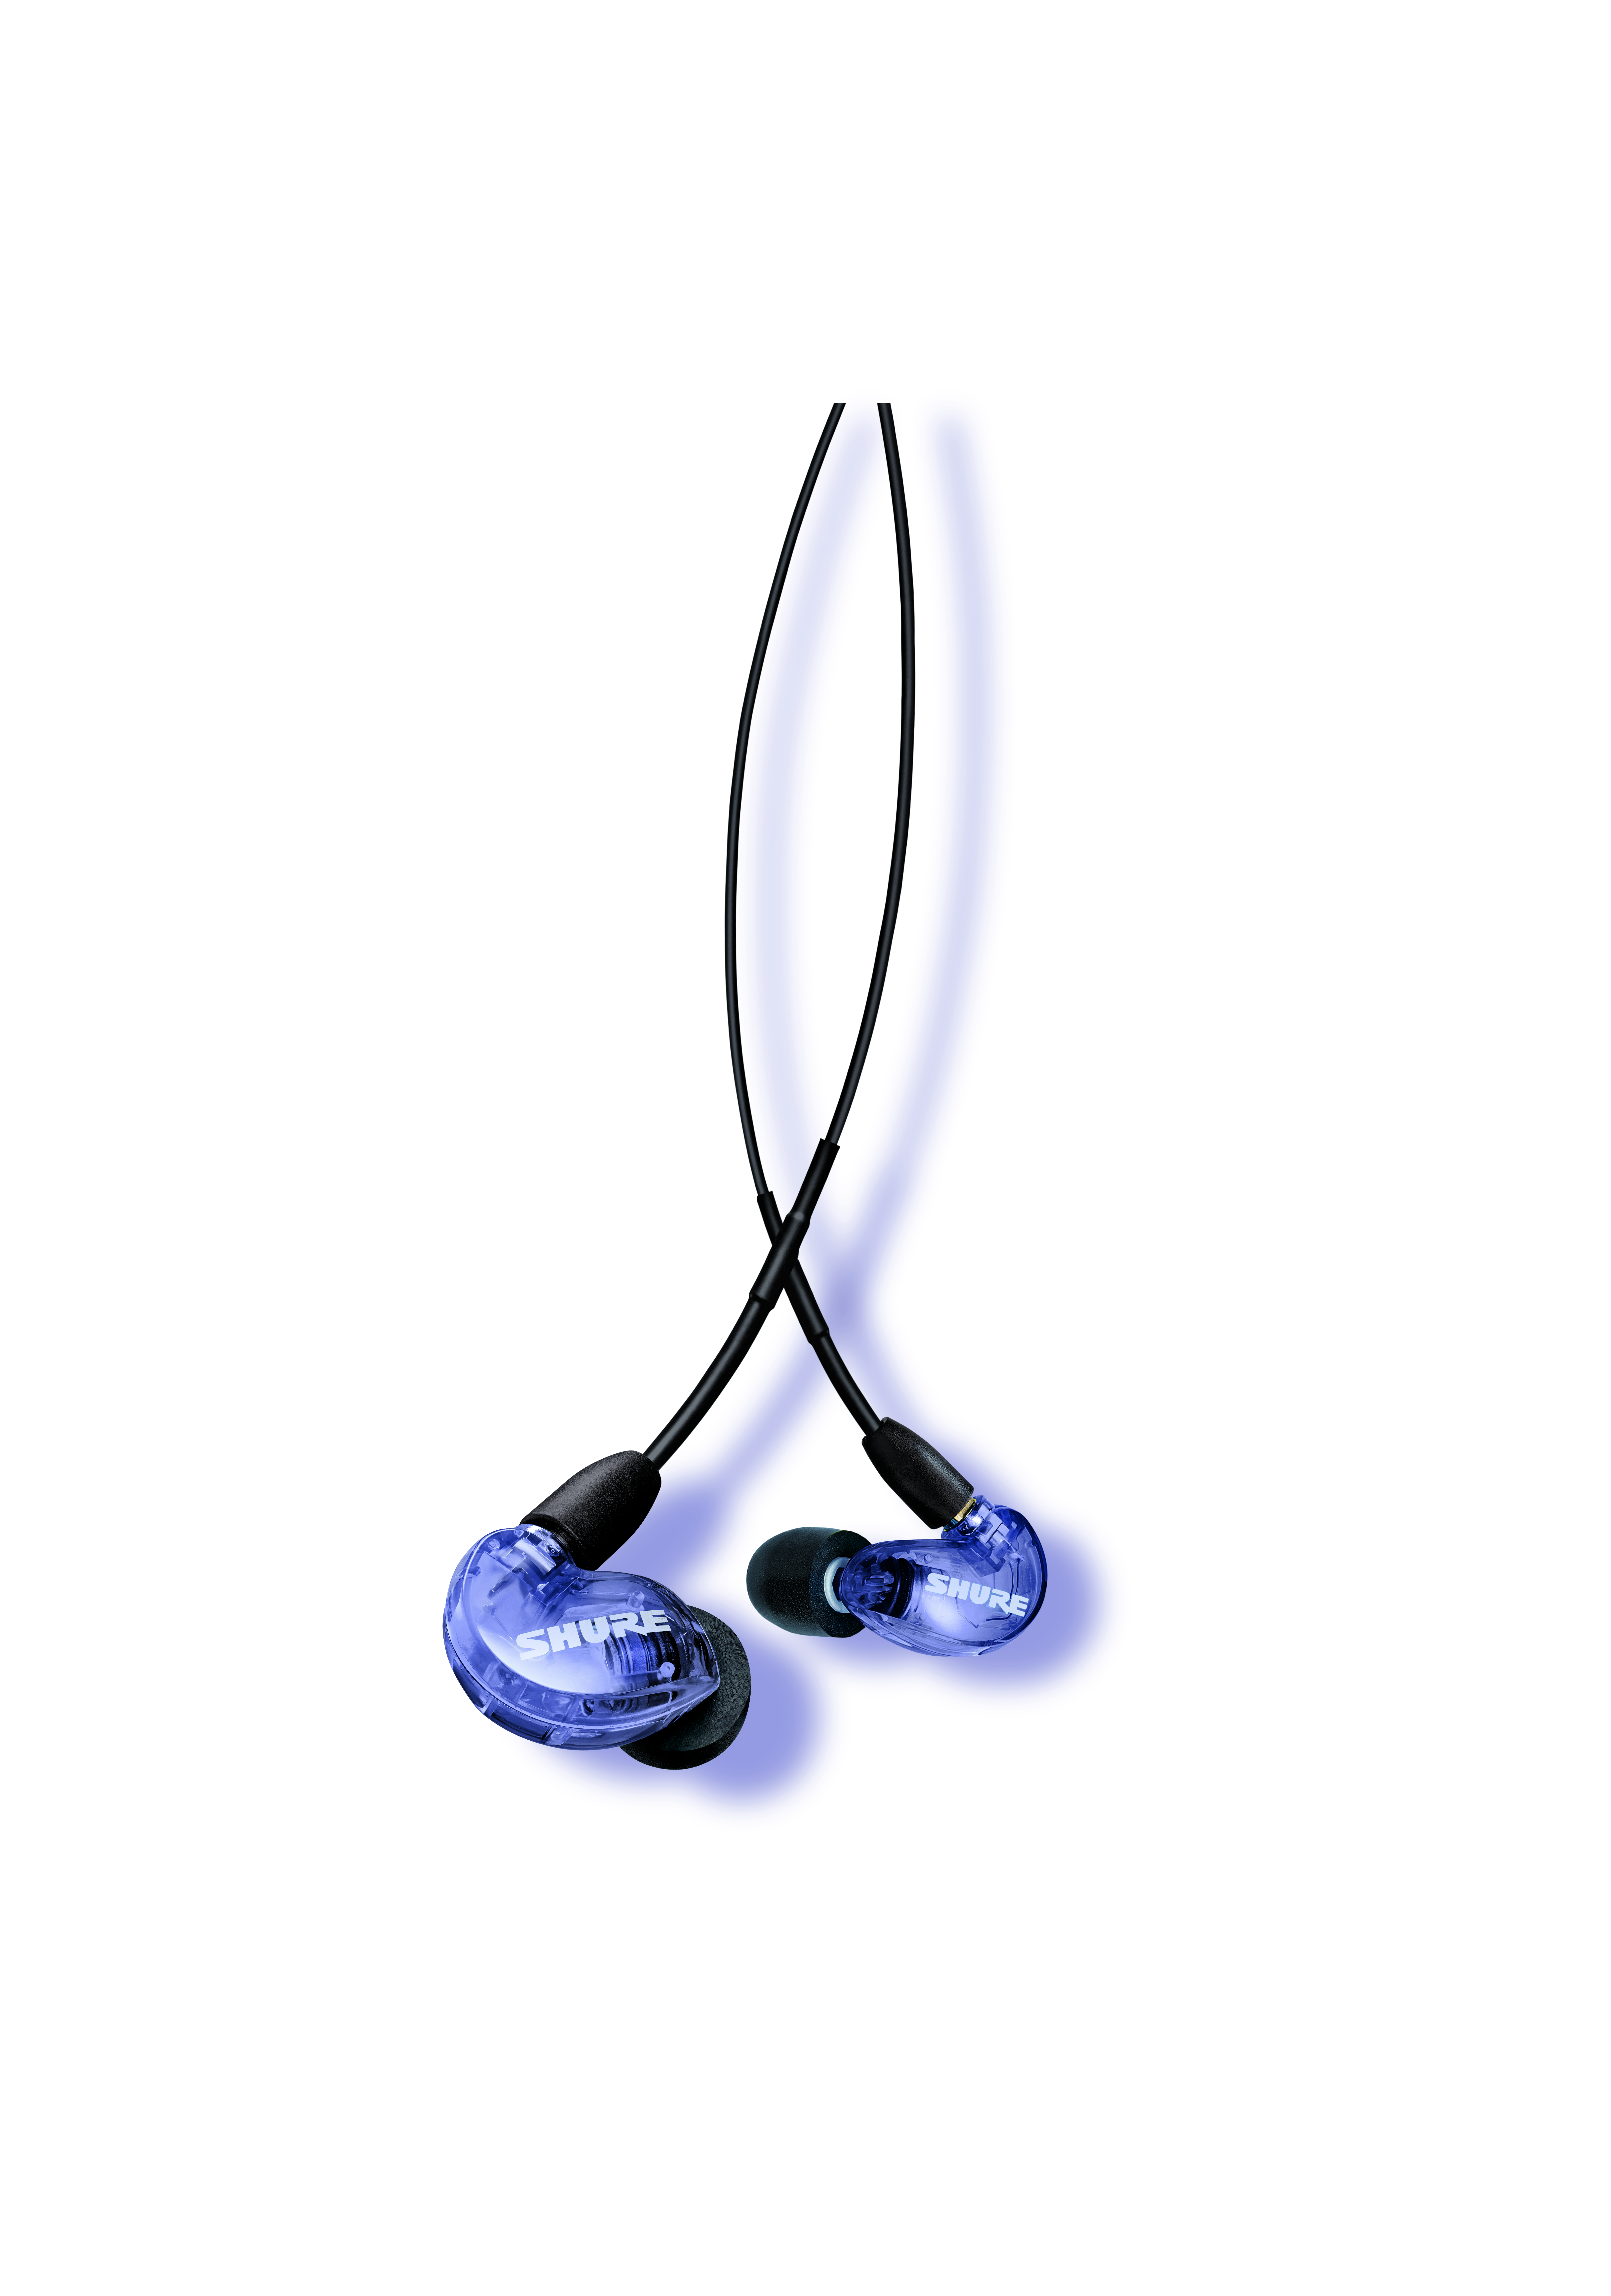 Shure releases Special Edition Purple SE215 Sound Isolating earphones